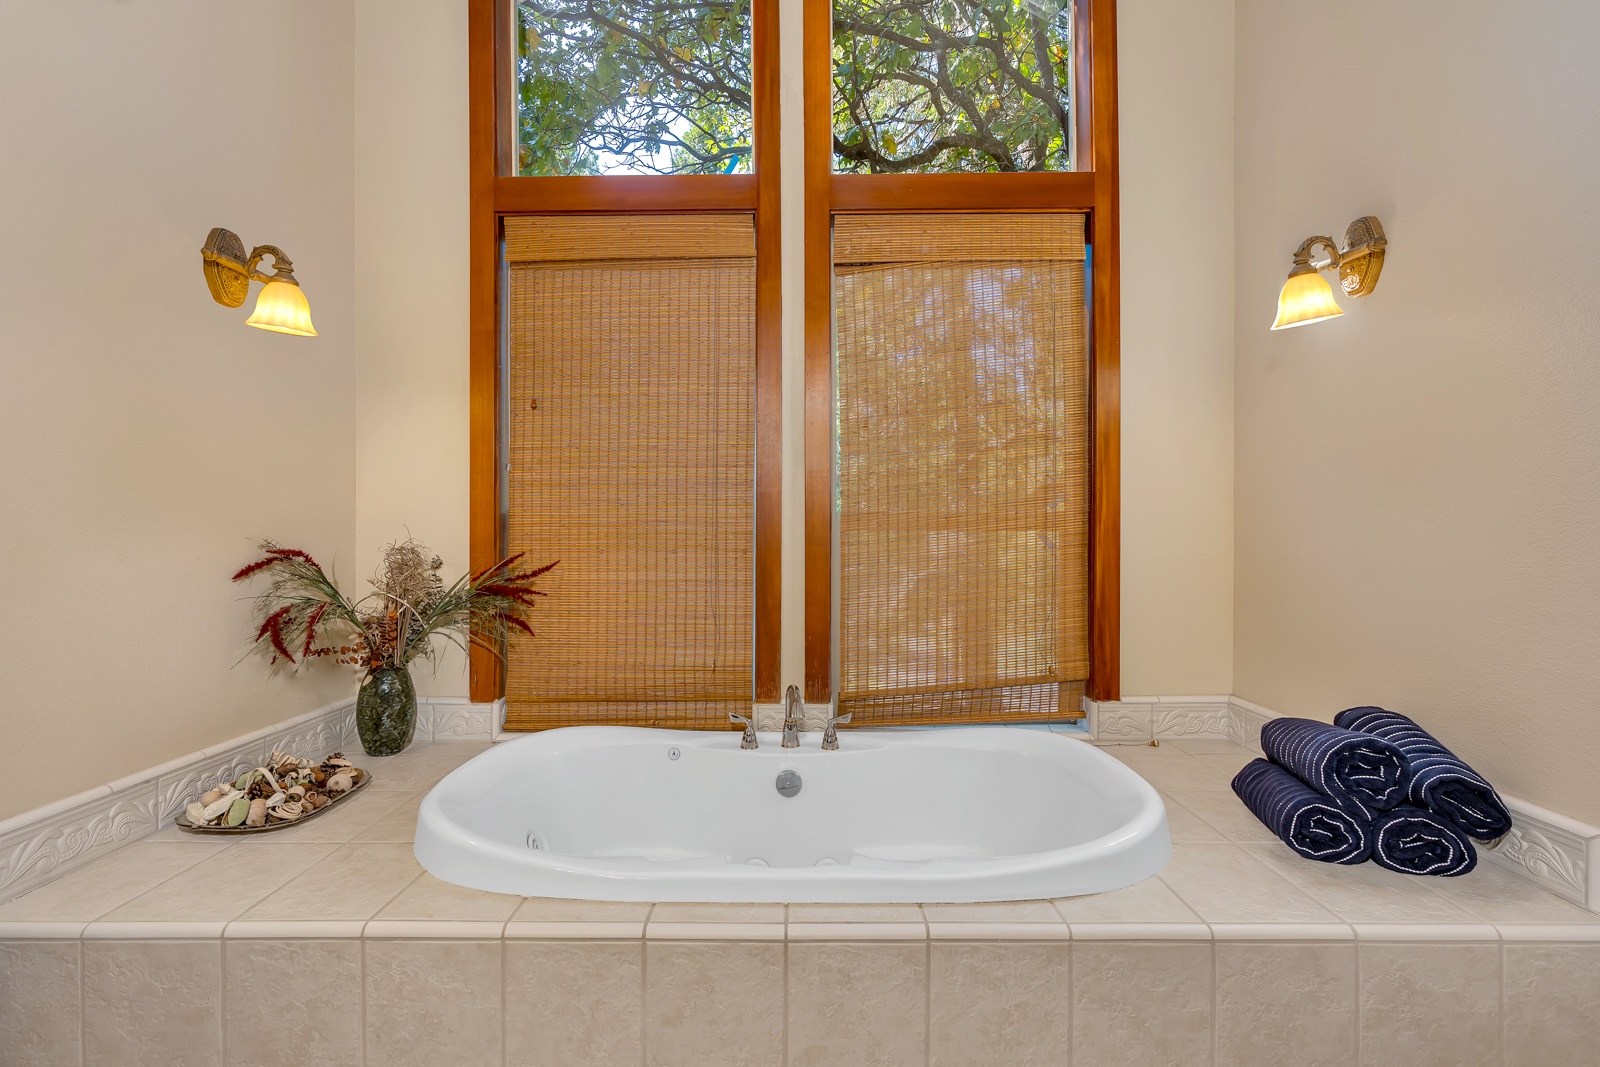 The king en suite boasts a double vanity, walk-in shower, & jetted soaking tub